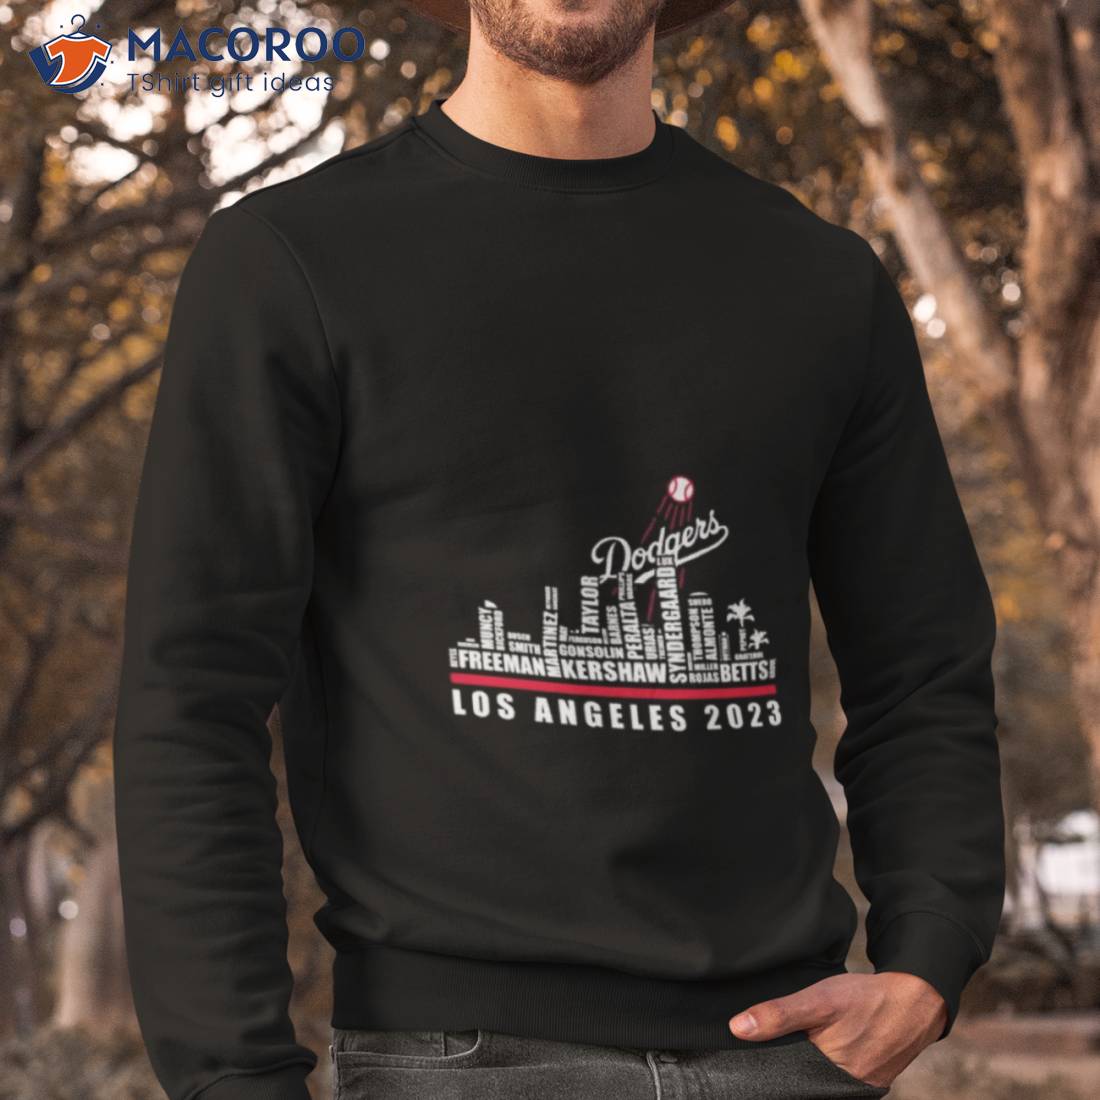 Los Angeles Dodgers Players Los Angeles 2023 City Shirt